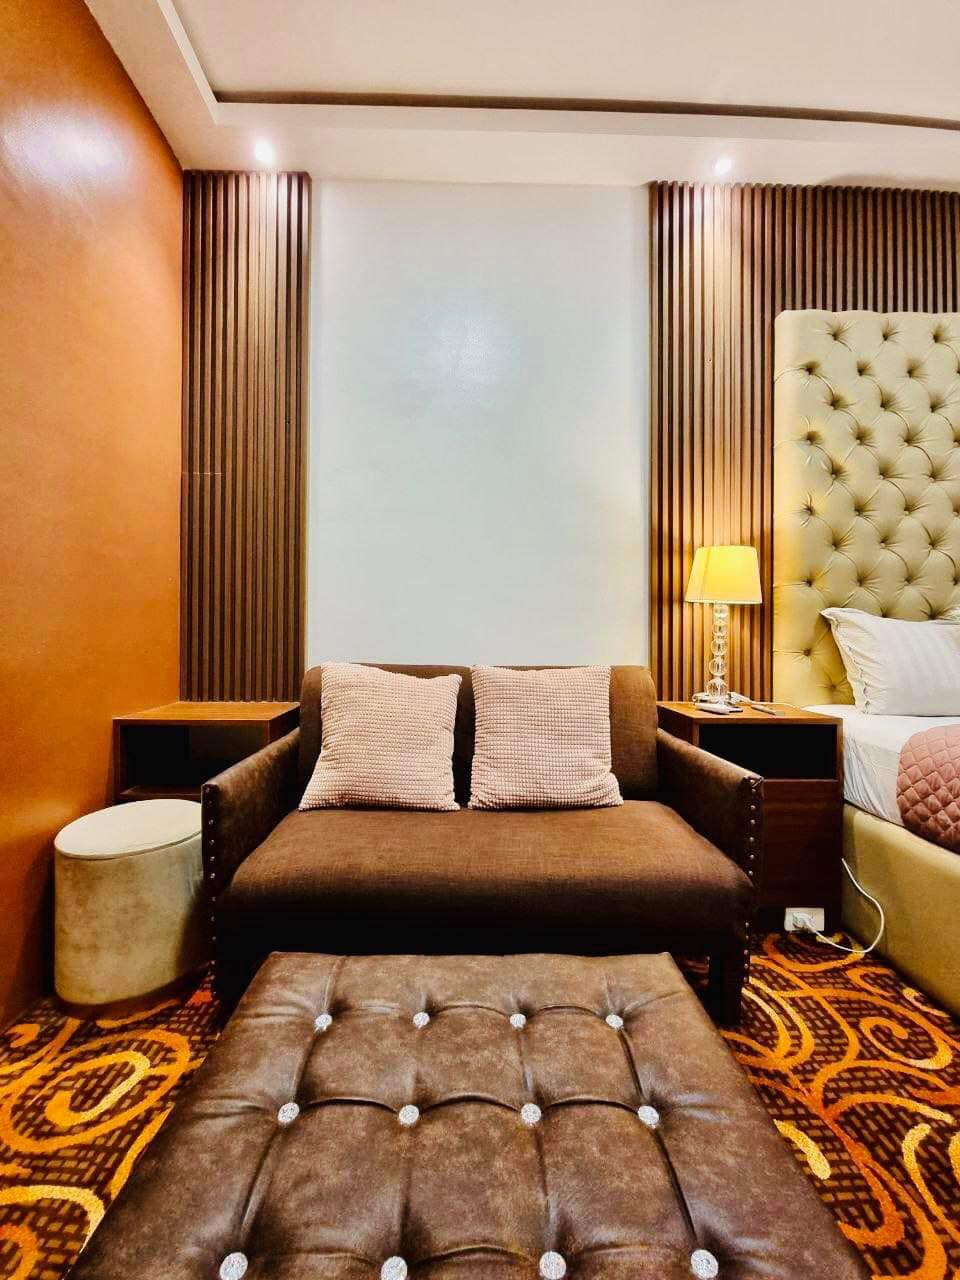 Staycation Affordable in Metro Manila